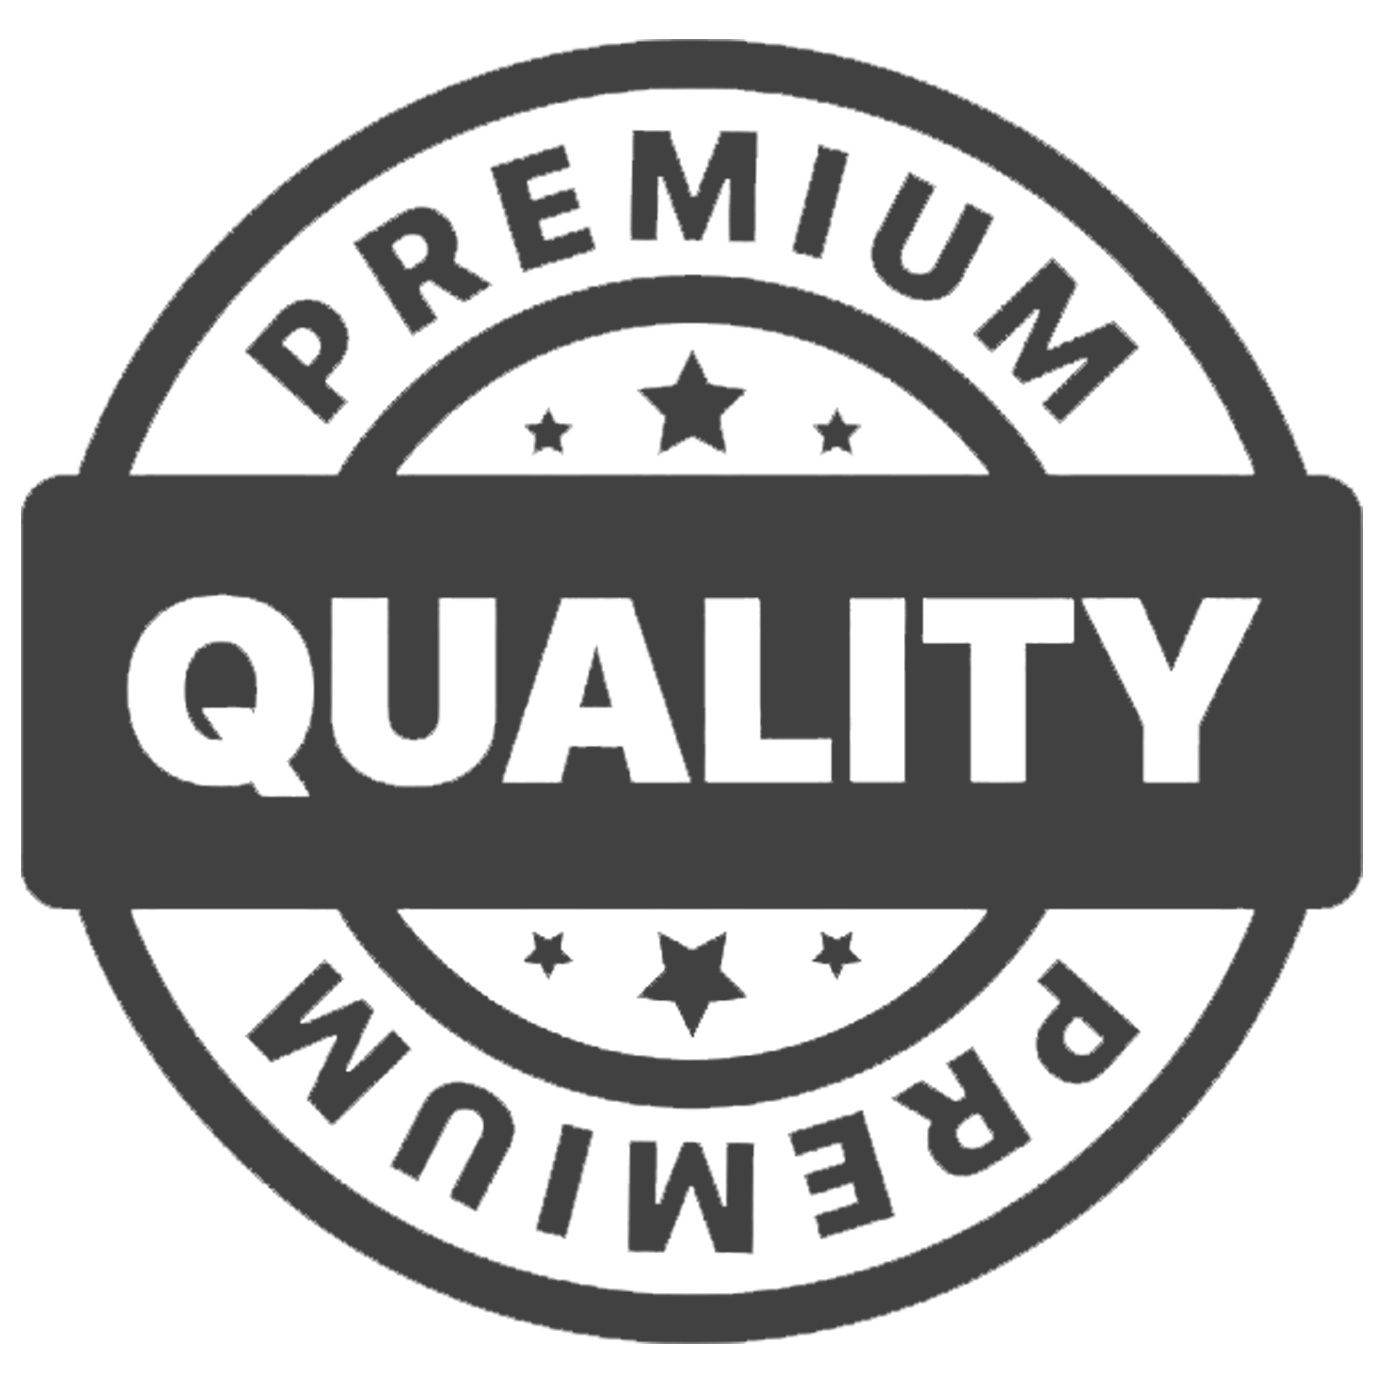 Quality Assurance Logo - Designs By Andrea